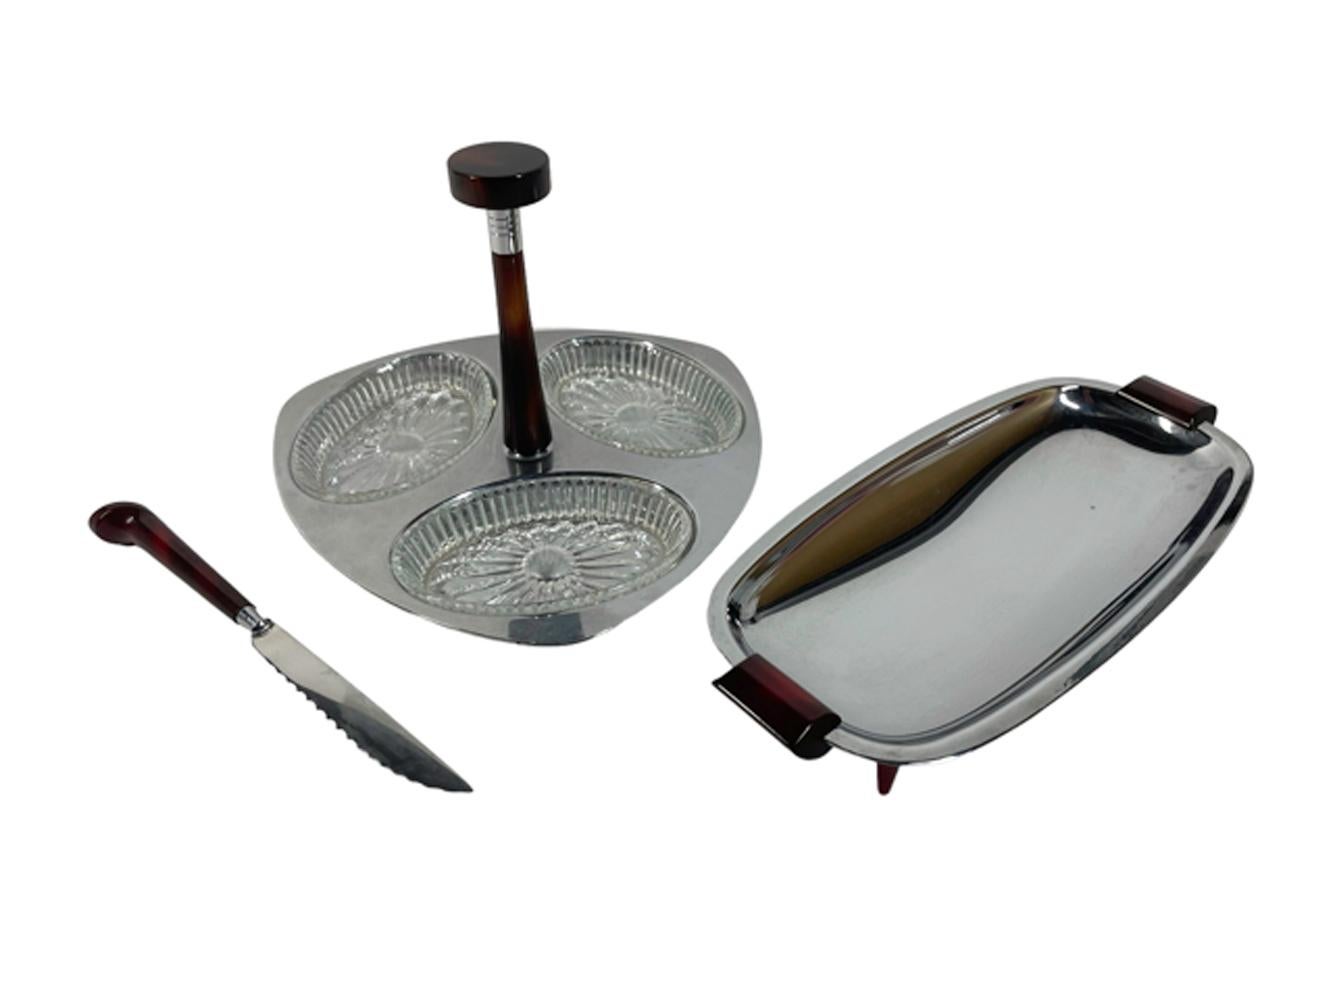 Three chrome and red Bakelite serving pieces by Glo-Hill: 1) a triangular welled relish tray with oval glass inserts and a central Bakelite handle, 2) an oblong shallow tray with Bakelite handles raised on Bakelite legs, and 3) a Bakelite handled